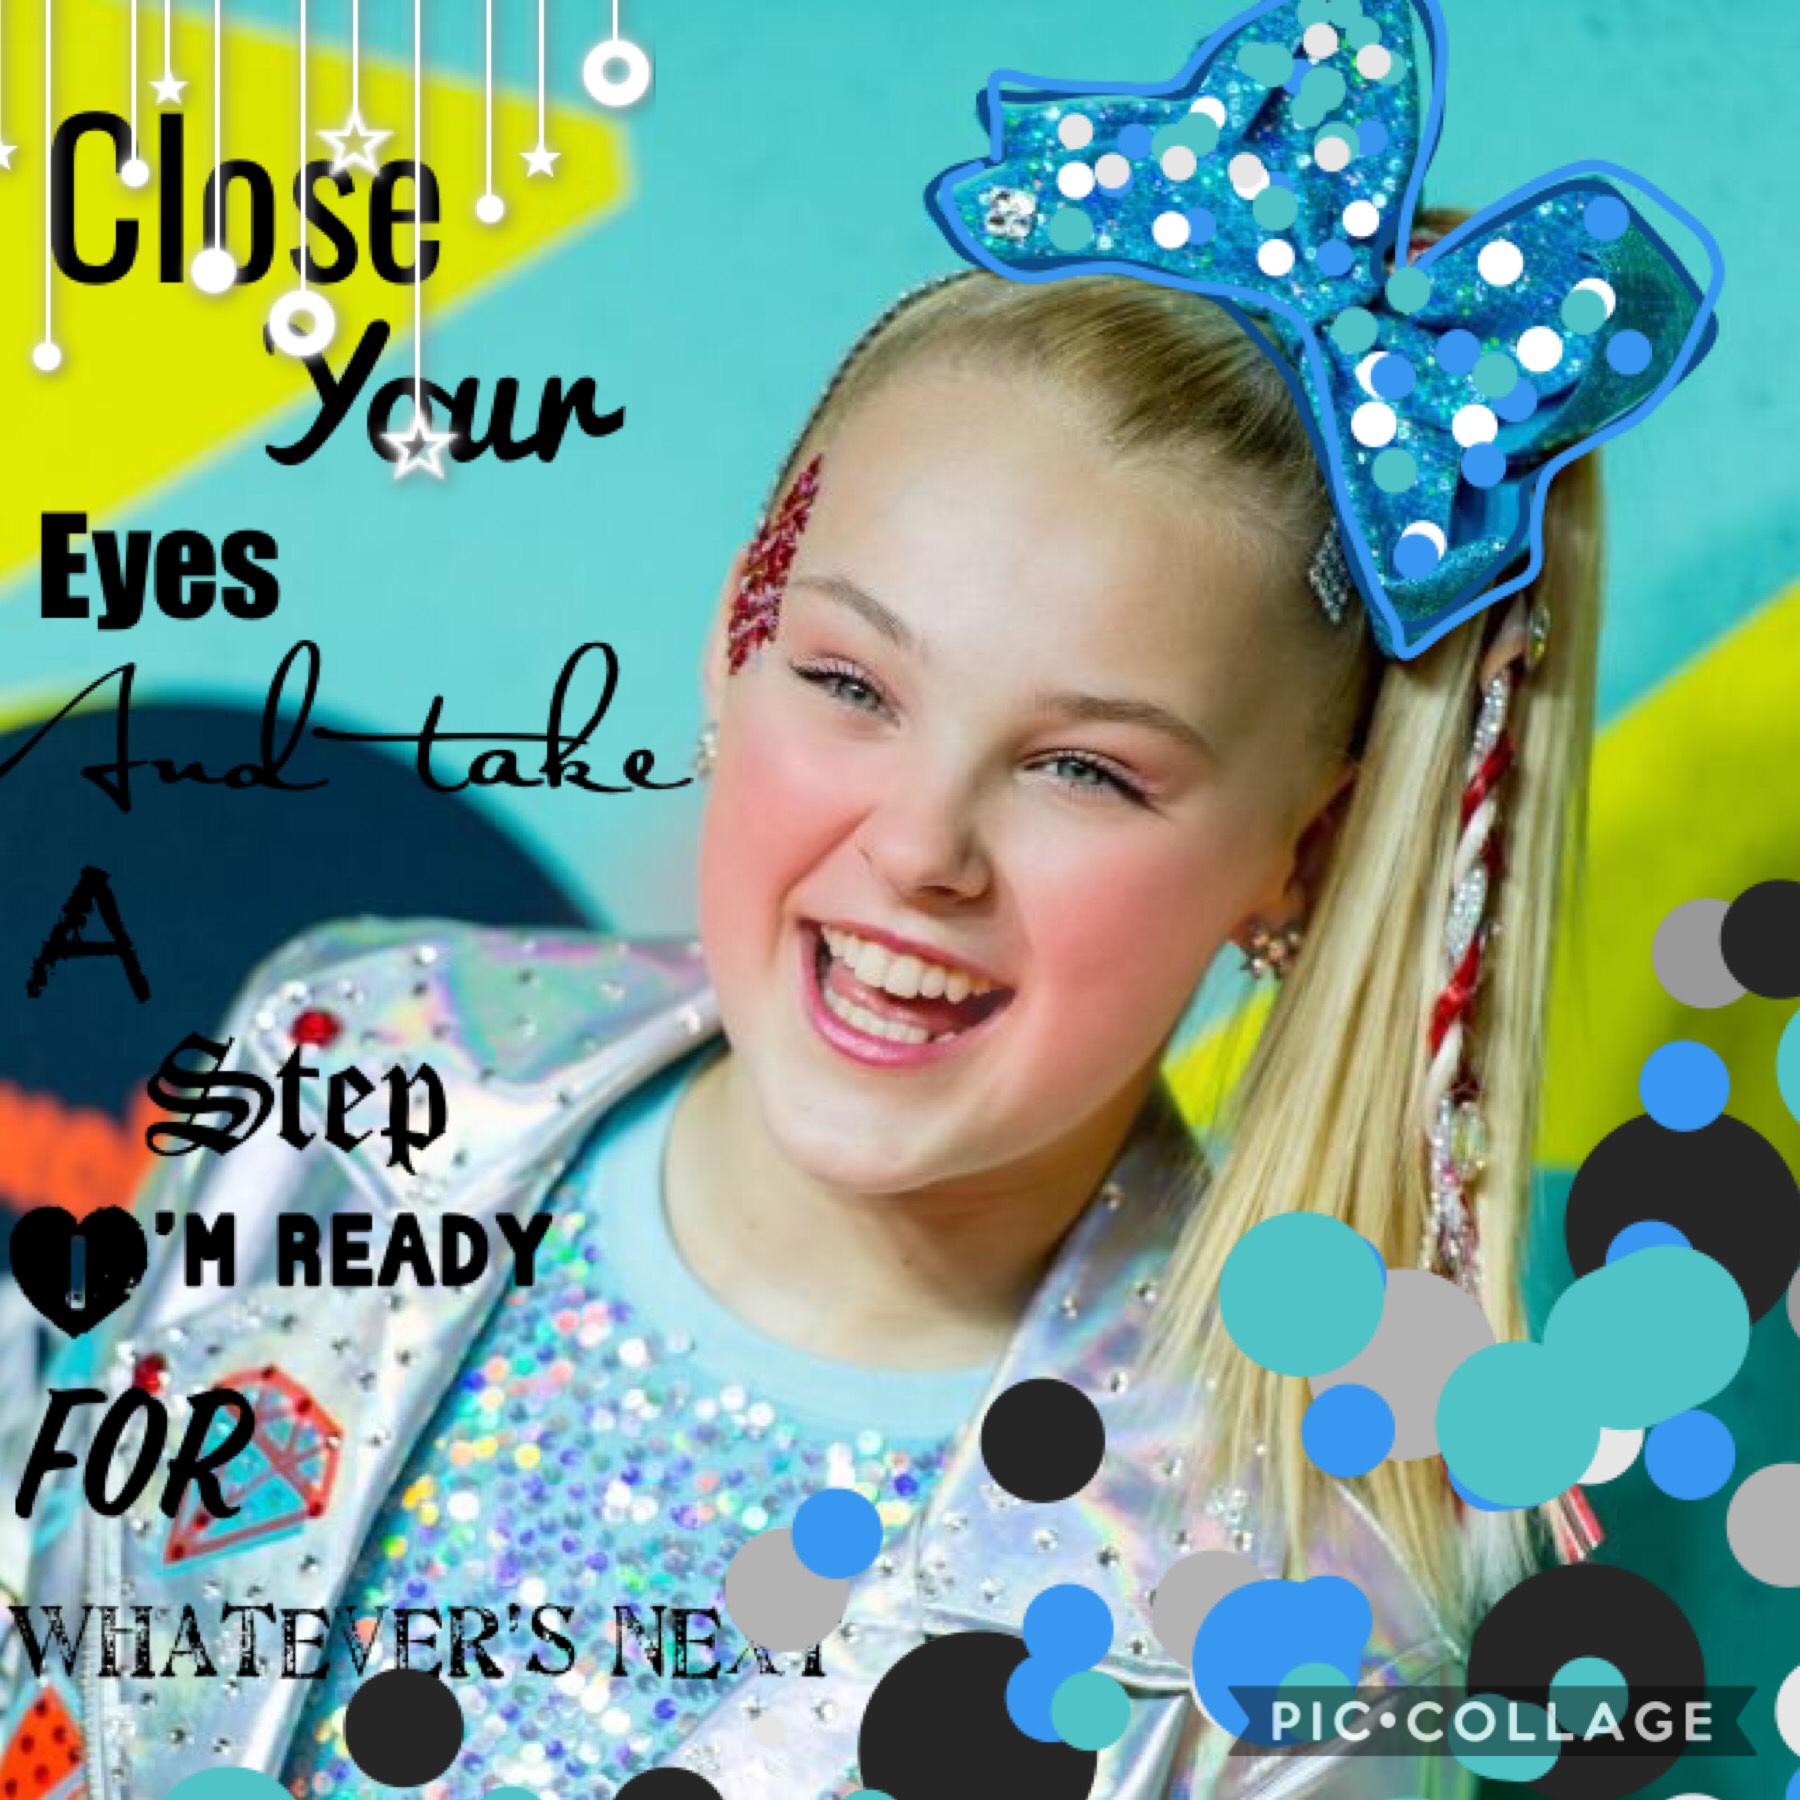 Tap🧡

QOTD: have you watched JoJo Siwa‘s only getting better music video yet?
AOTD: YESSSSS!!!!!!!!! I LOVE IT SOOOO MUCH!!!!!!!!!!!💜😁
This collage has a lyric from JoJo Siwa’s new song!